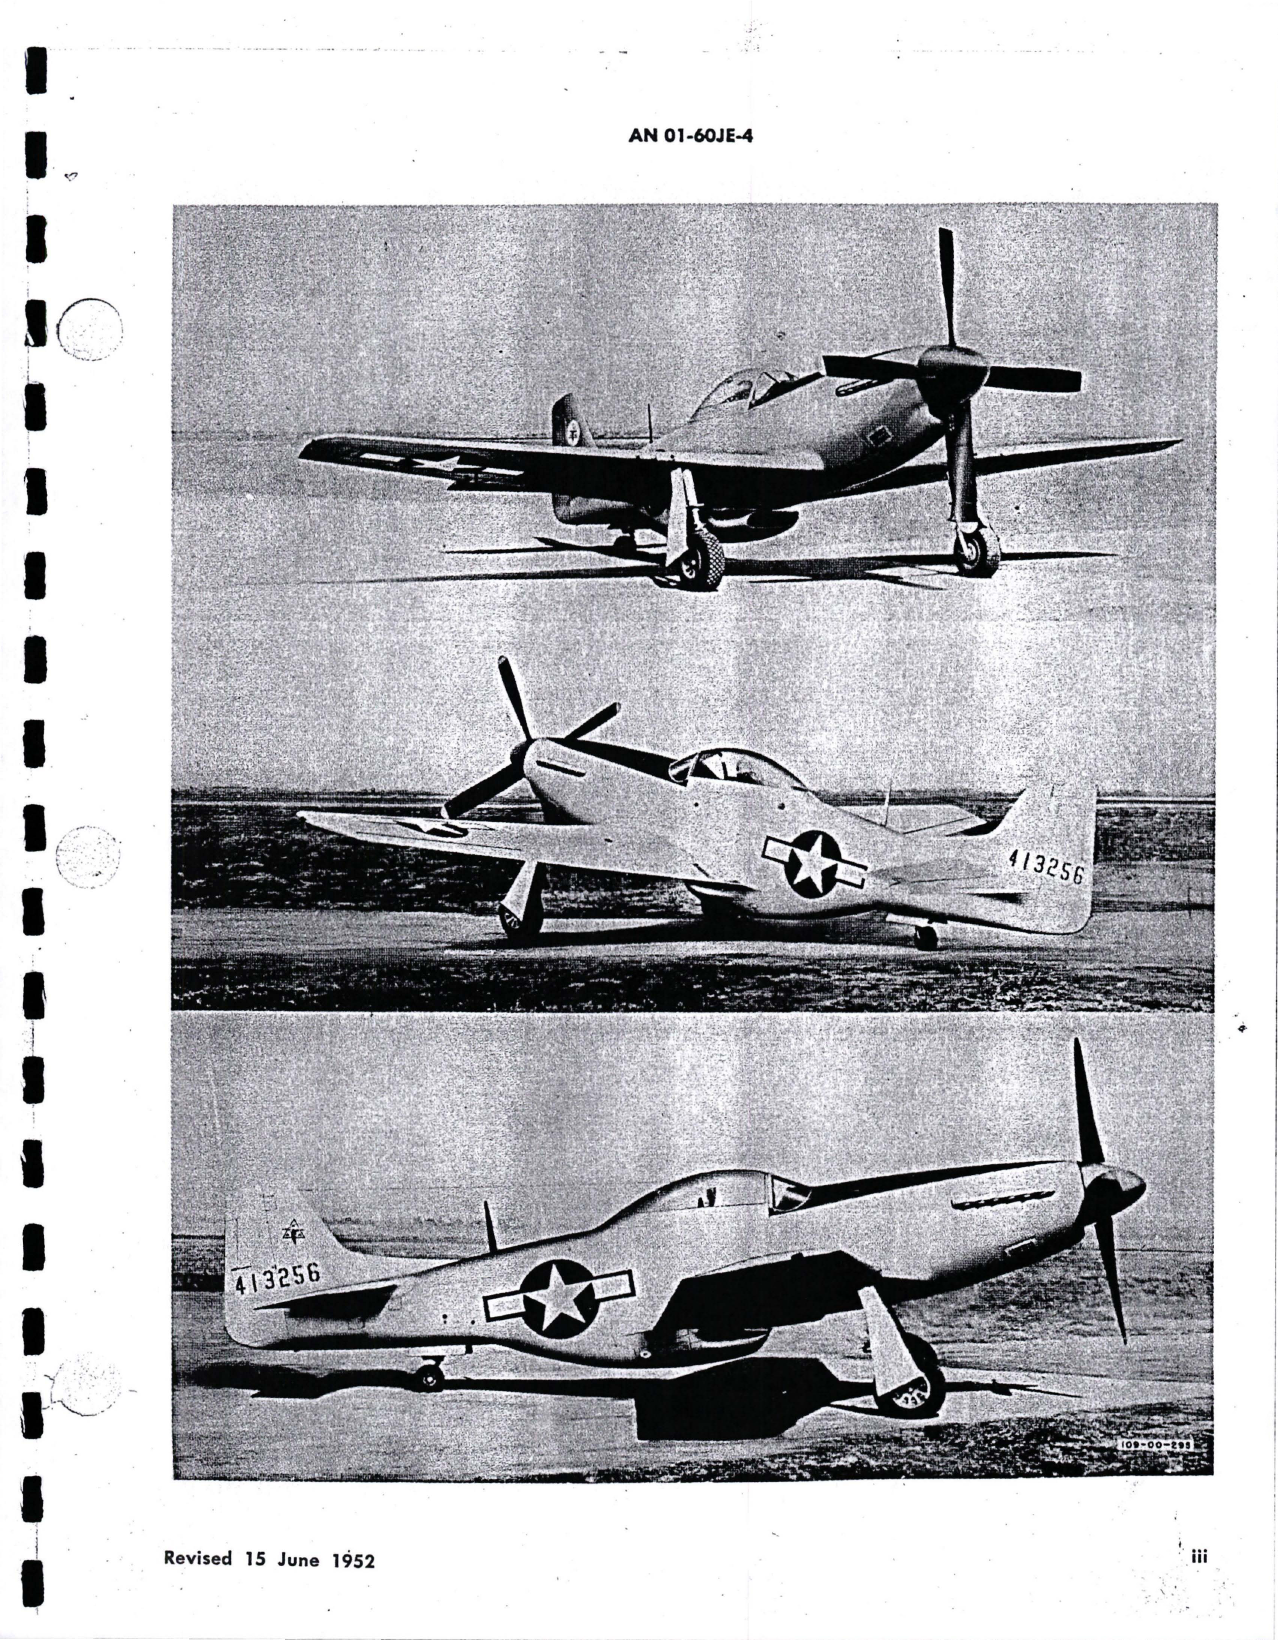 Sample page 7 from AirCorps Library document: Parts Catalog for F-51D, TF-51D and F-51K